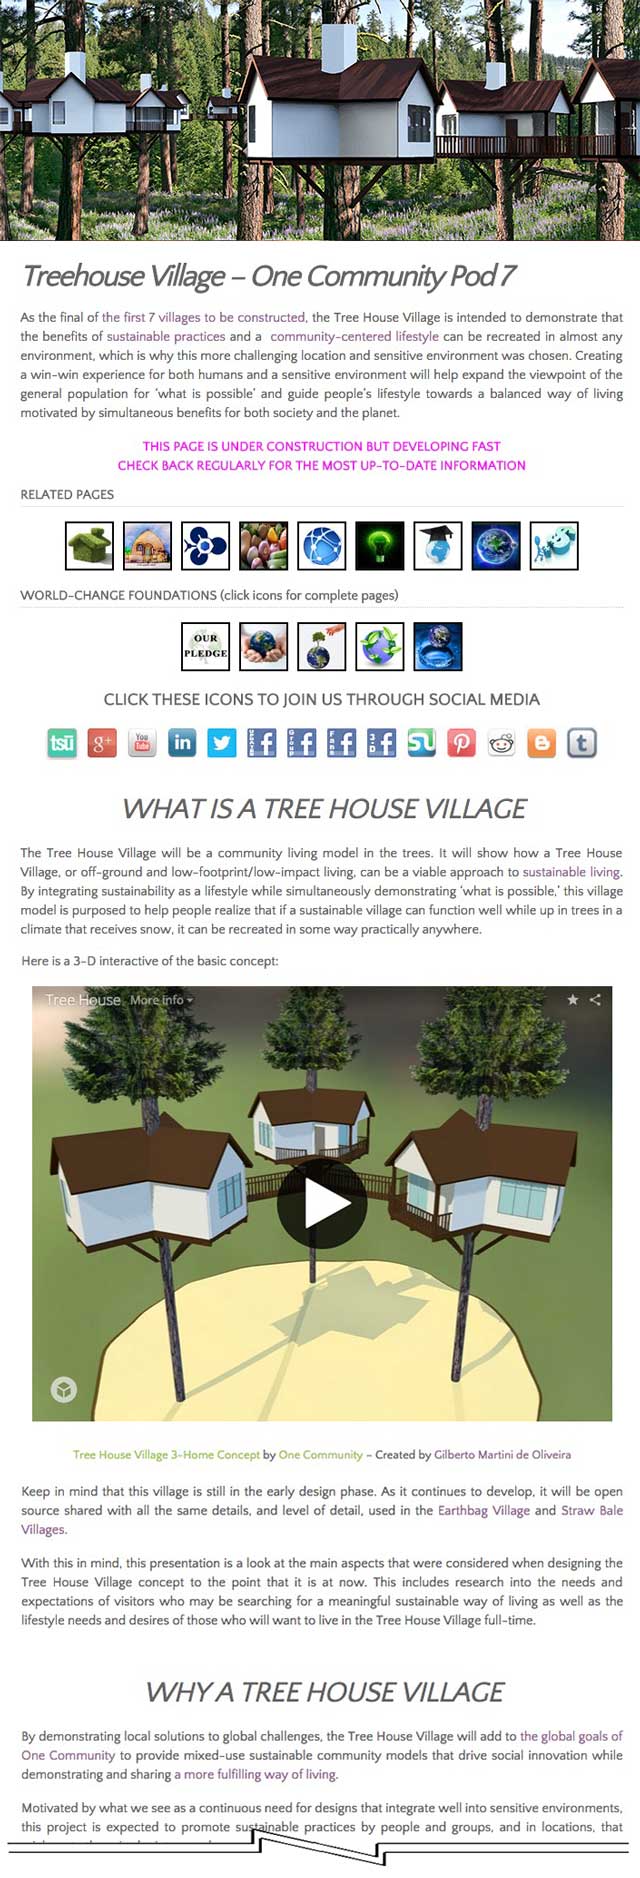 updated the Tree House Village (Pod 7) with a new header image, an overview of what this village is all about, and the 3-D interactives from Gilberto Martini de Oliveira (3D Animation Designer), One Community